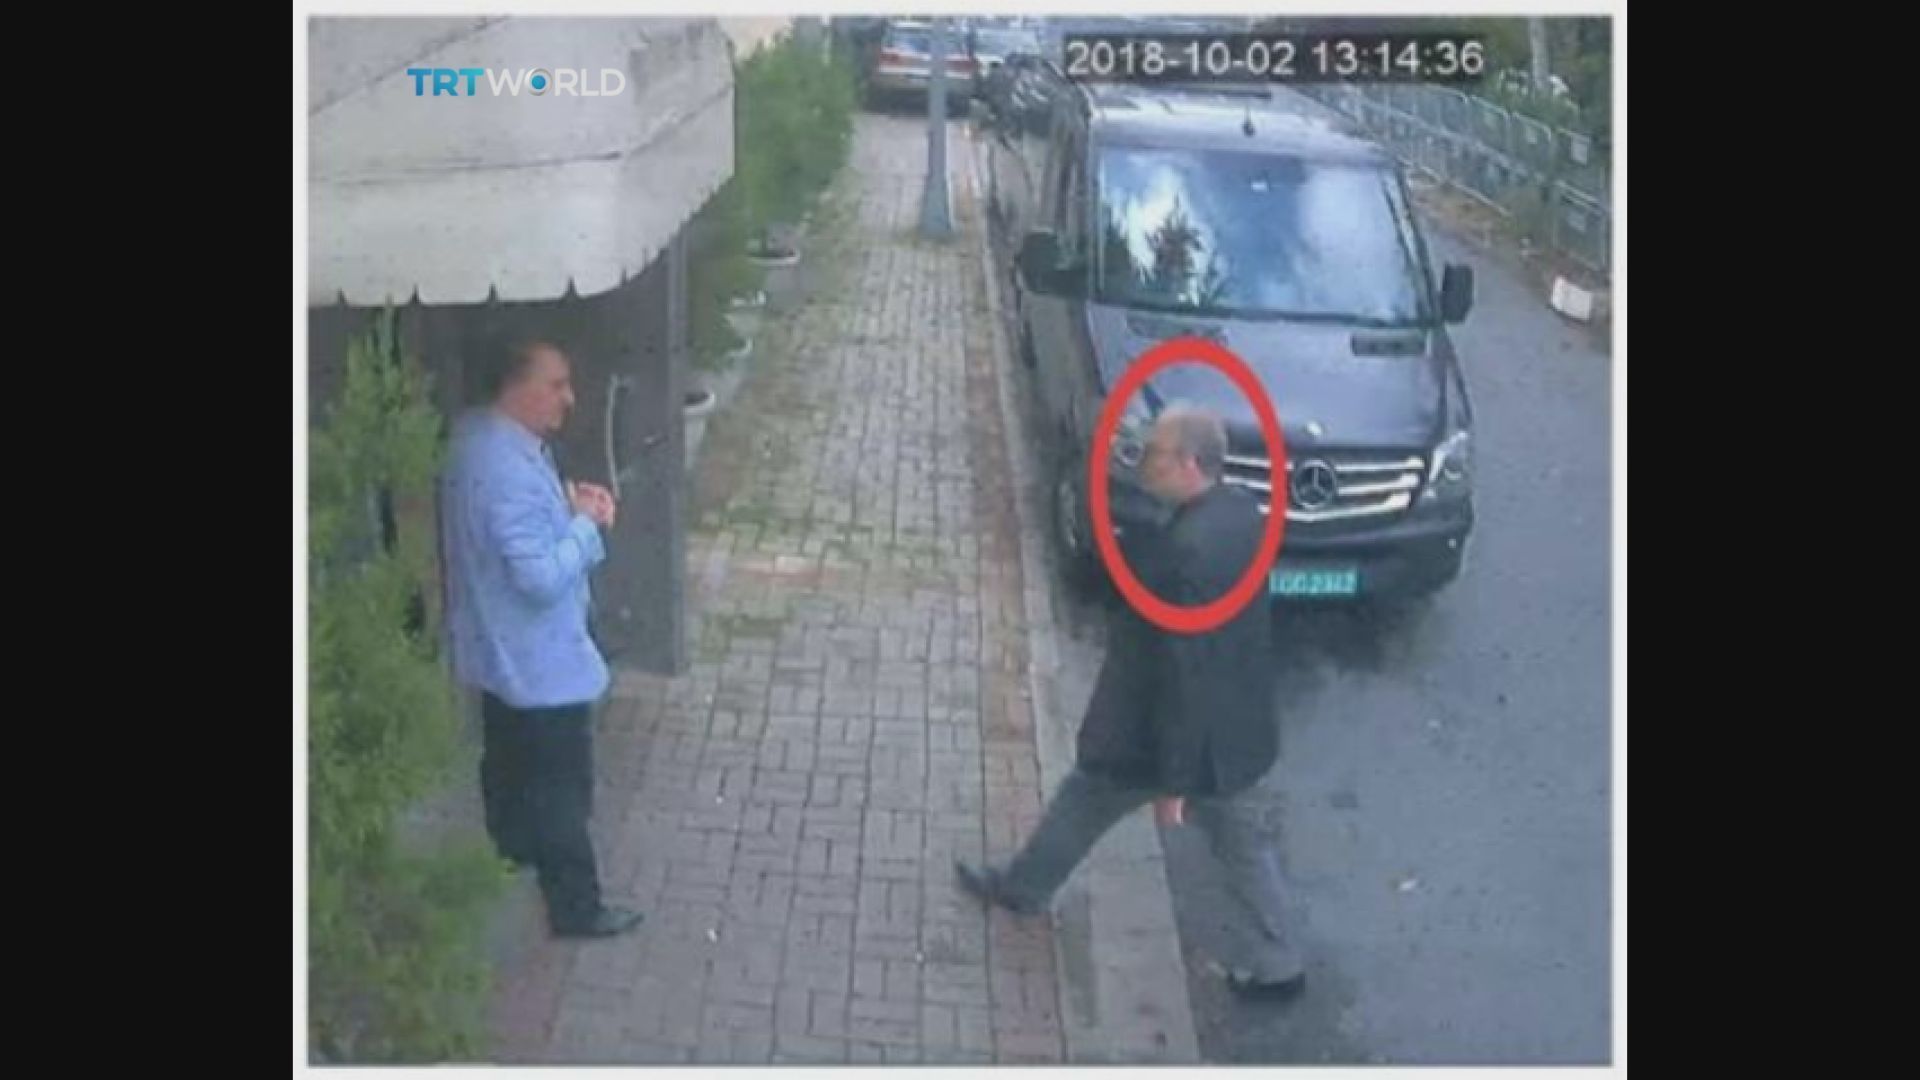 PHOTO: This image taken from CCTV video obtained by the Turkish broadcaster TRT World and made available on Sunday, Oct. 21, 2018, purportedly showing Saudi journalist Jamal Khashoggi entering the Saudi consulate in Istanbul, Oct. 2, 2018.